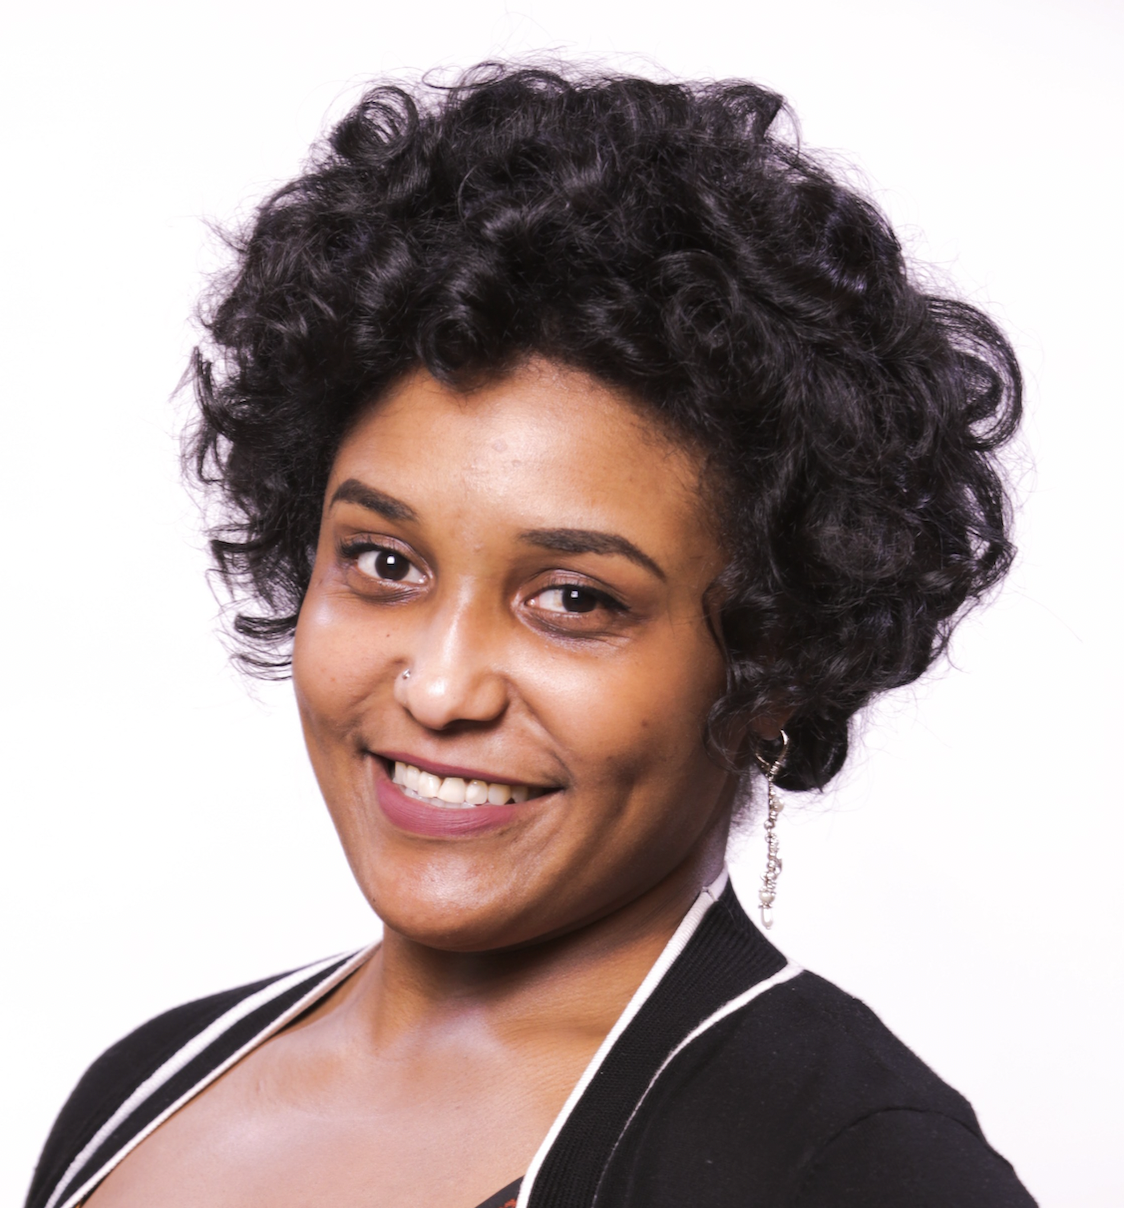 Whitney is an African American female with short black curly hair, smiling in front of a white background and wearing a black sweater with a black and gold decorated top.